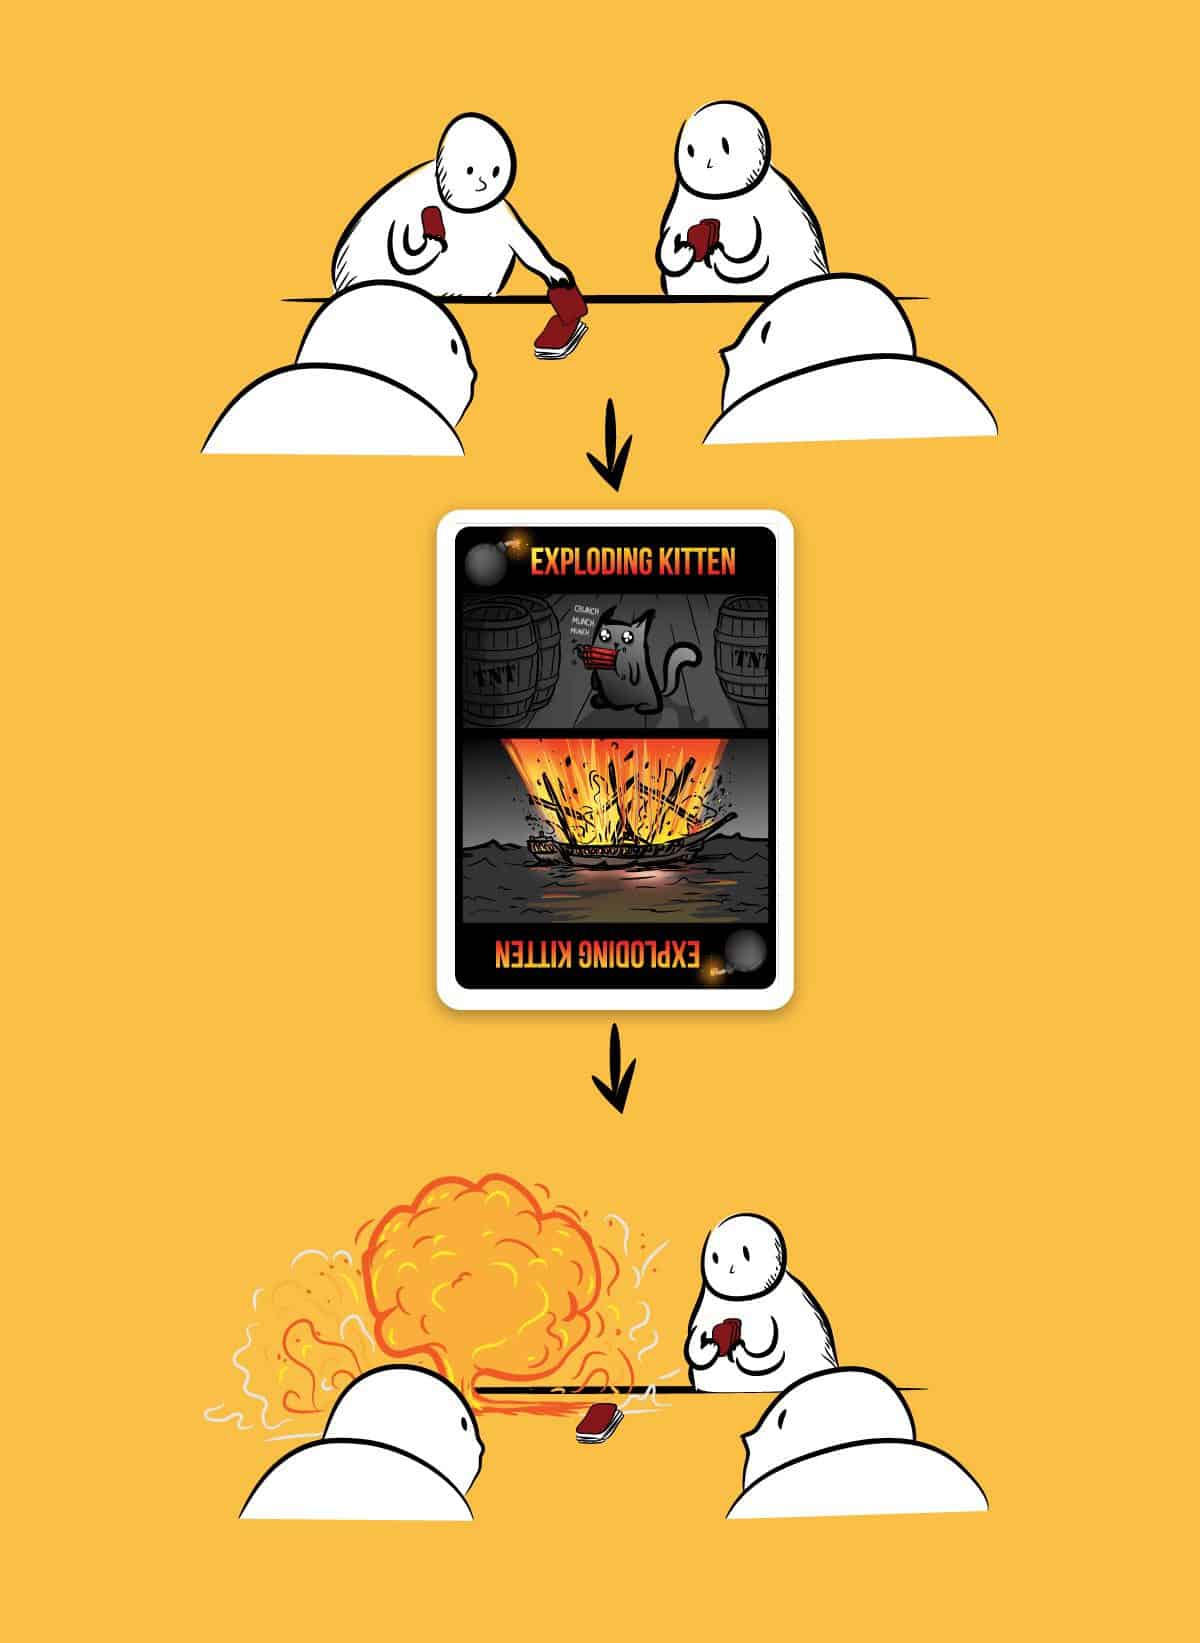 Cartoon characters playing a game of Exploding Kittens.